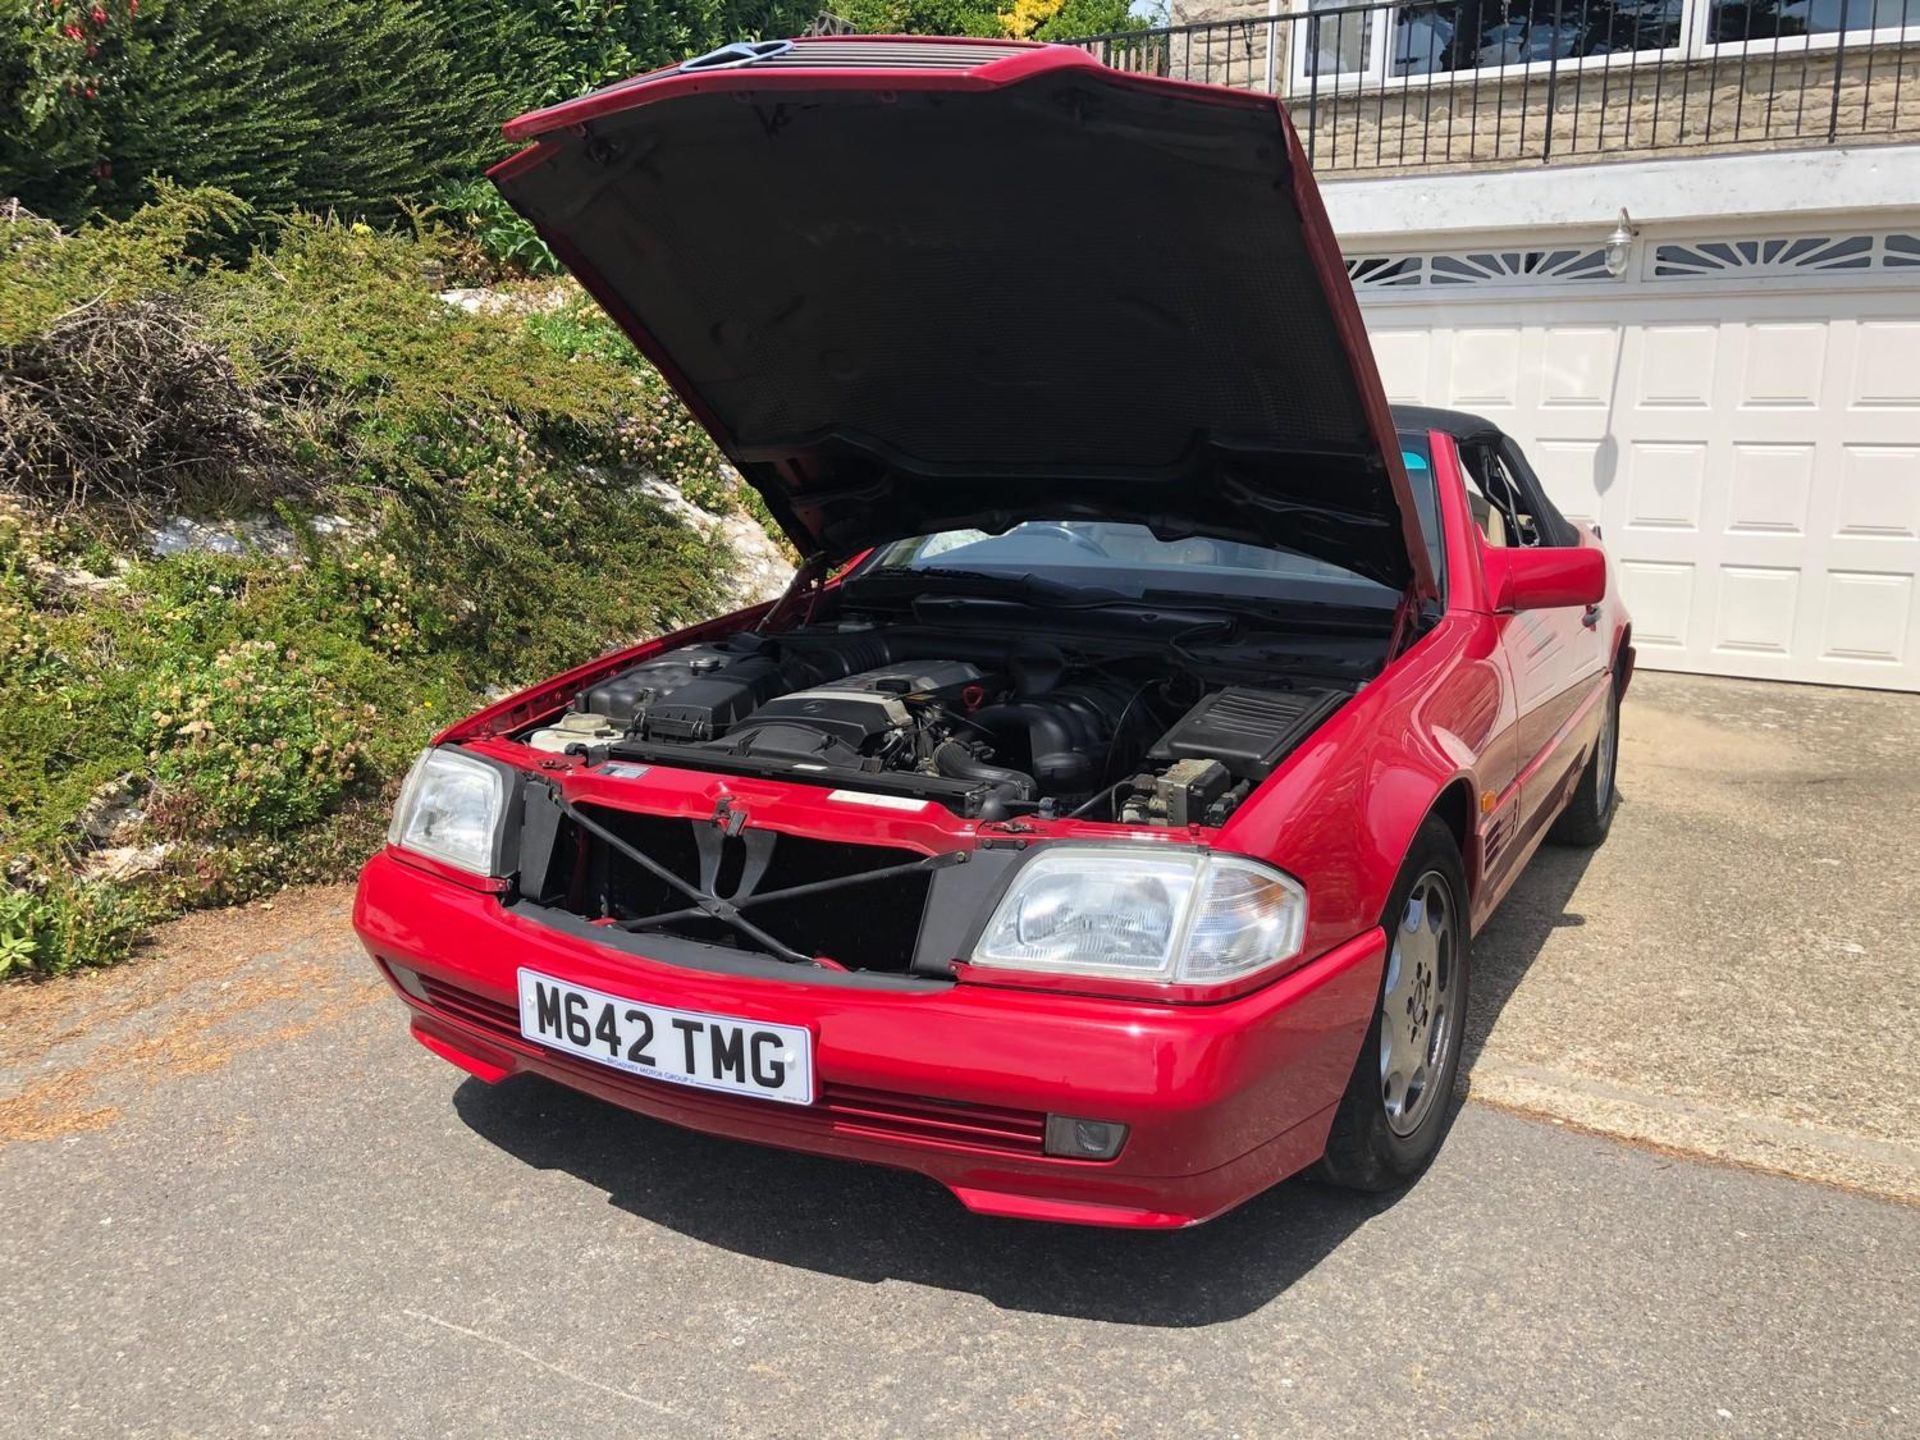 A 1995 Mercedes-Benz 280SL Registration number M642 TMG V5C MOT expires February 2021 Red with a - Image 45 of 107